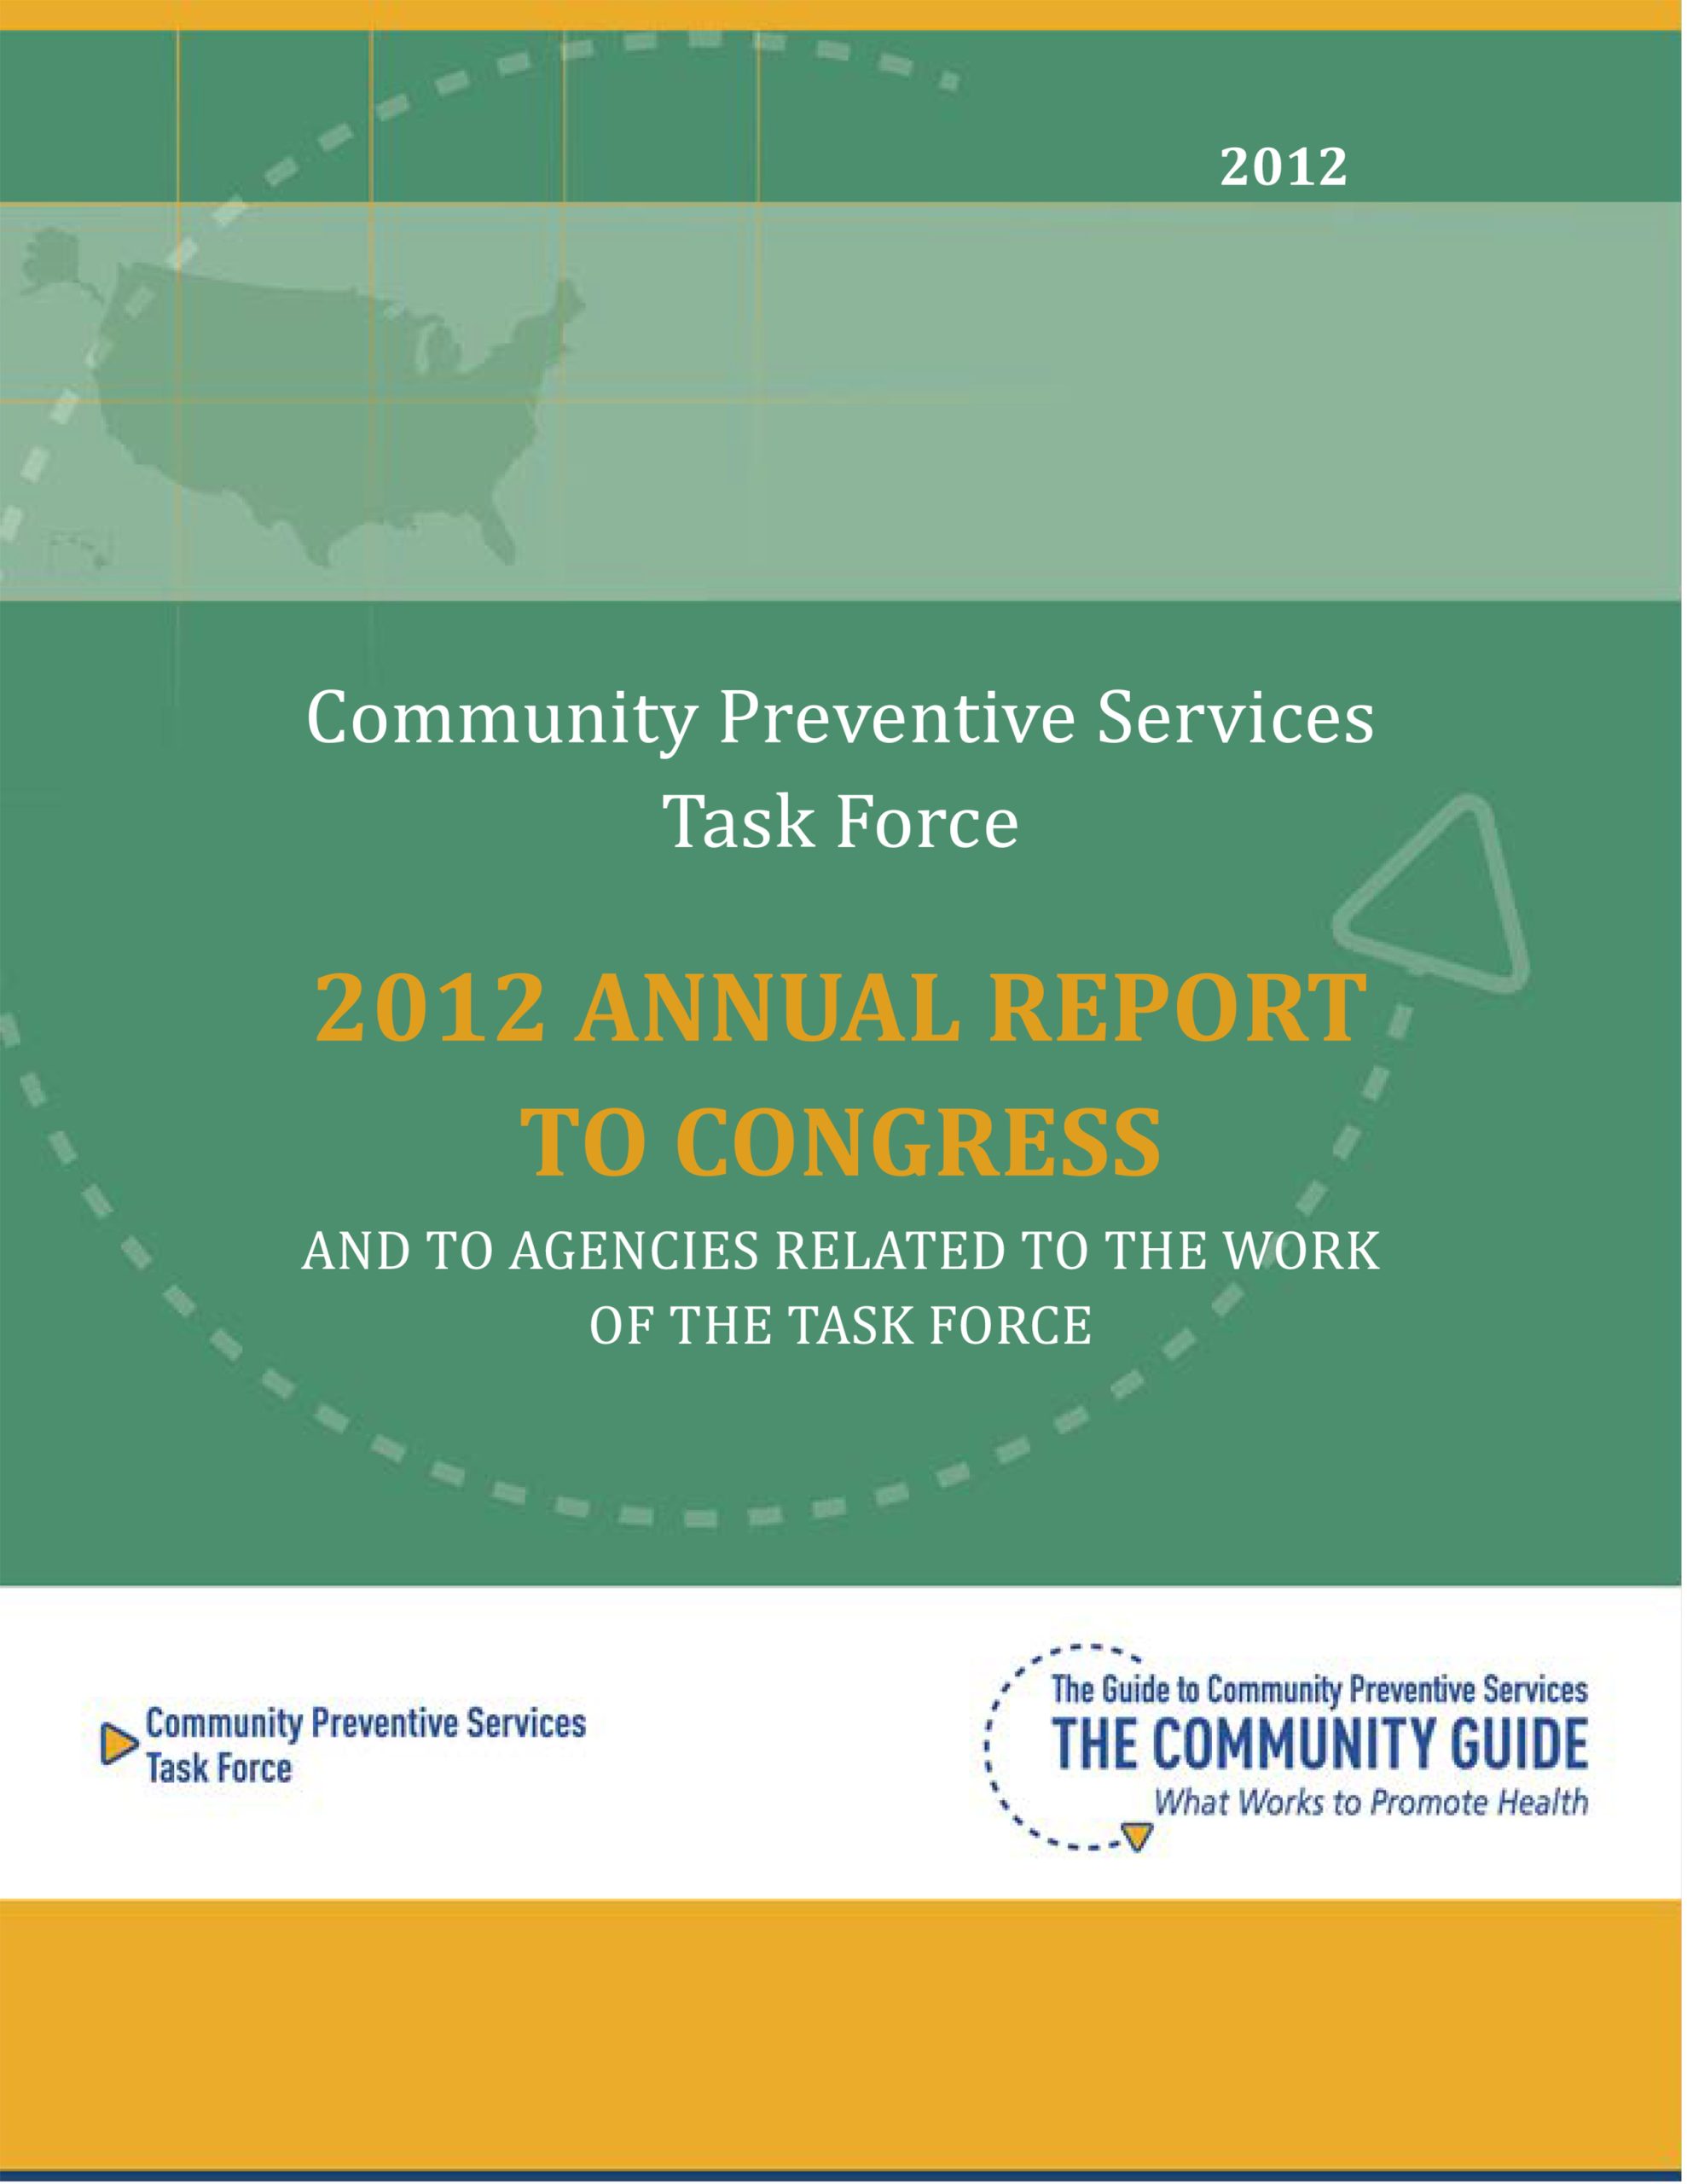 The cover of the 2012 CPSTF Annual Report to Congress